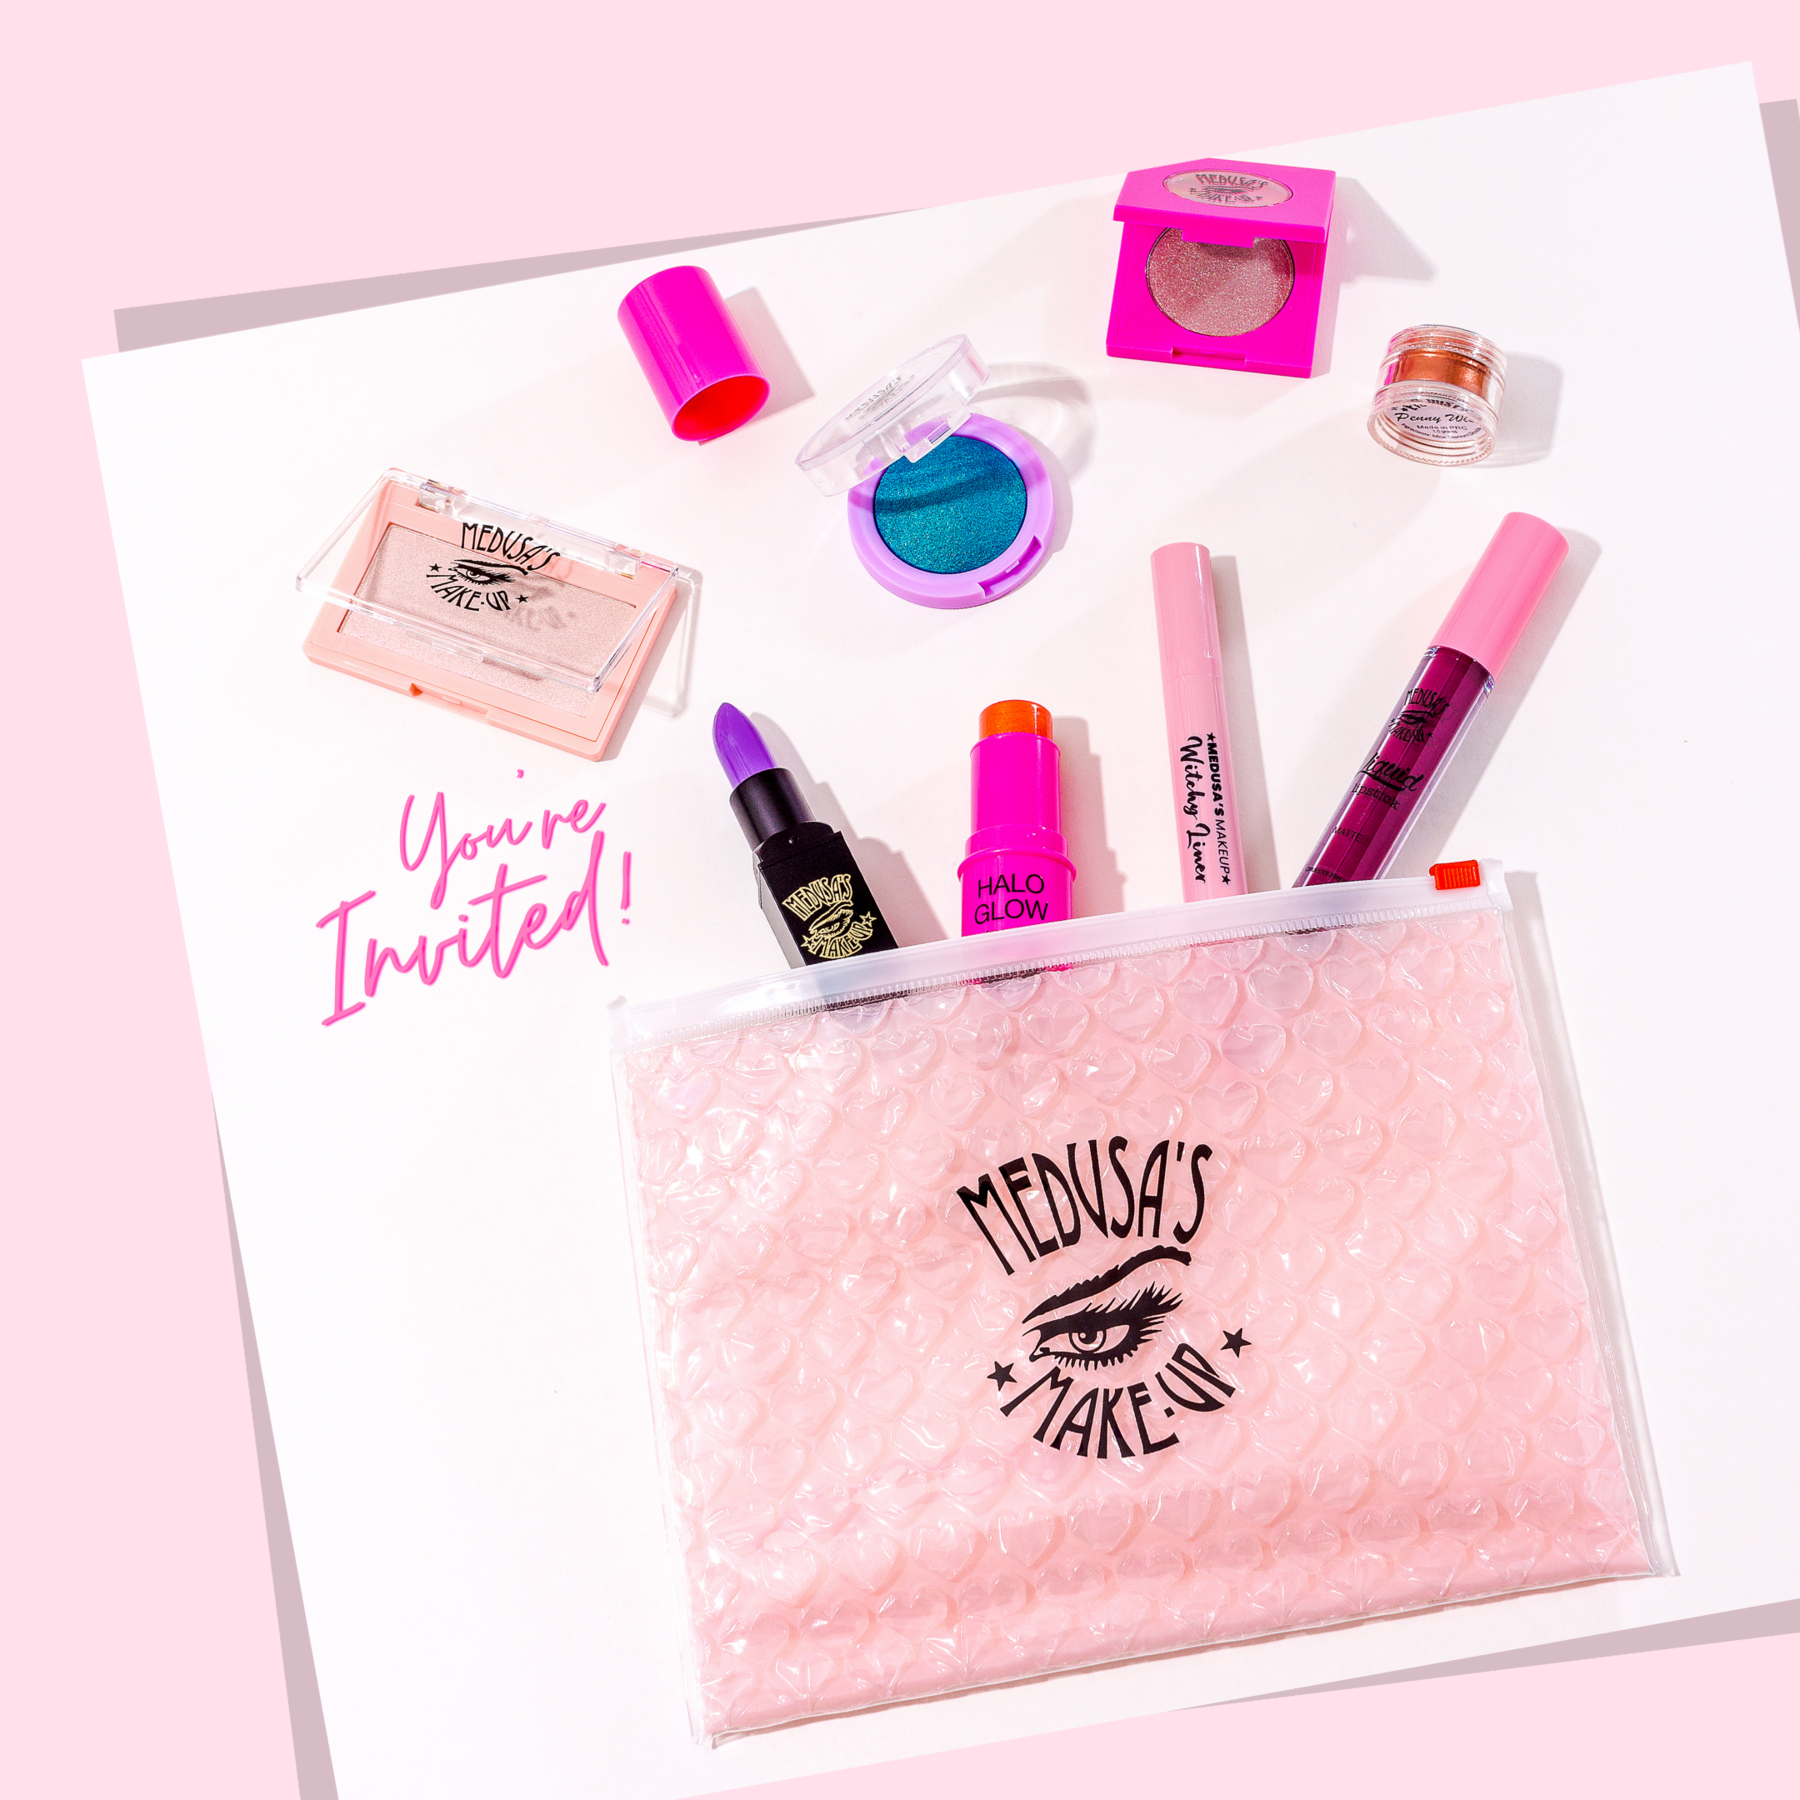 Medusas Makeup Exclusive: Take 15% Off Your First Box